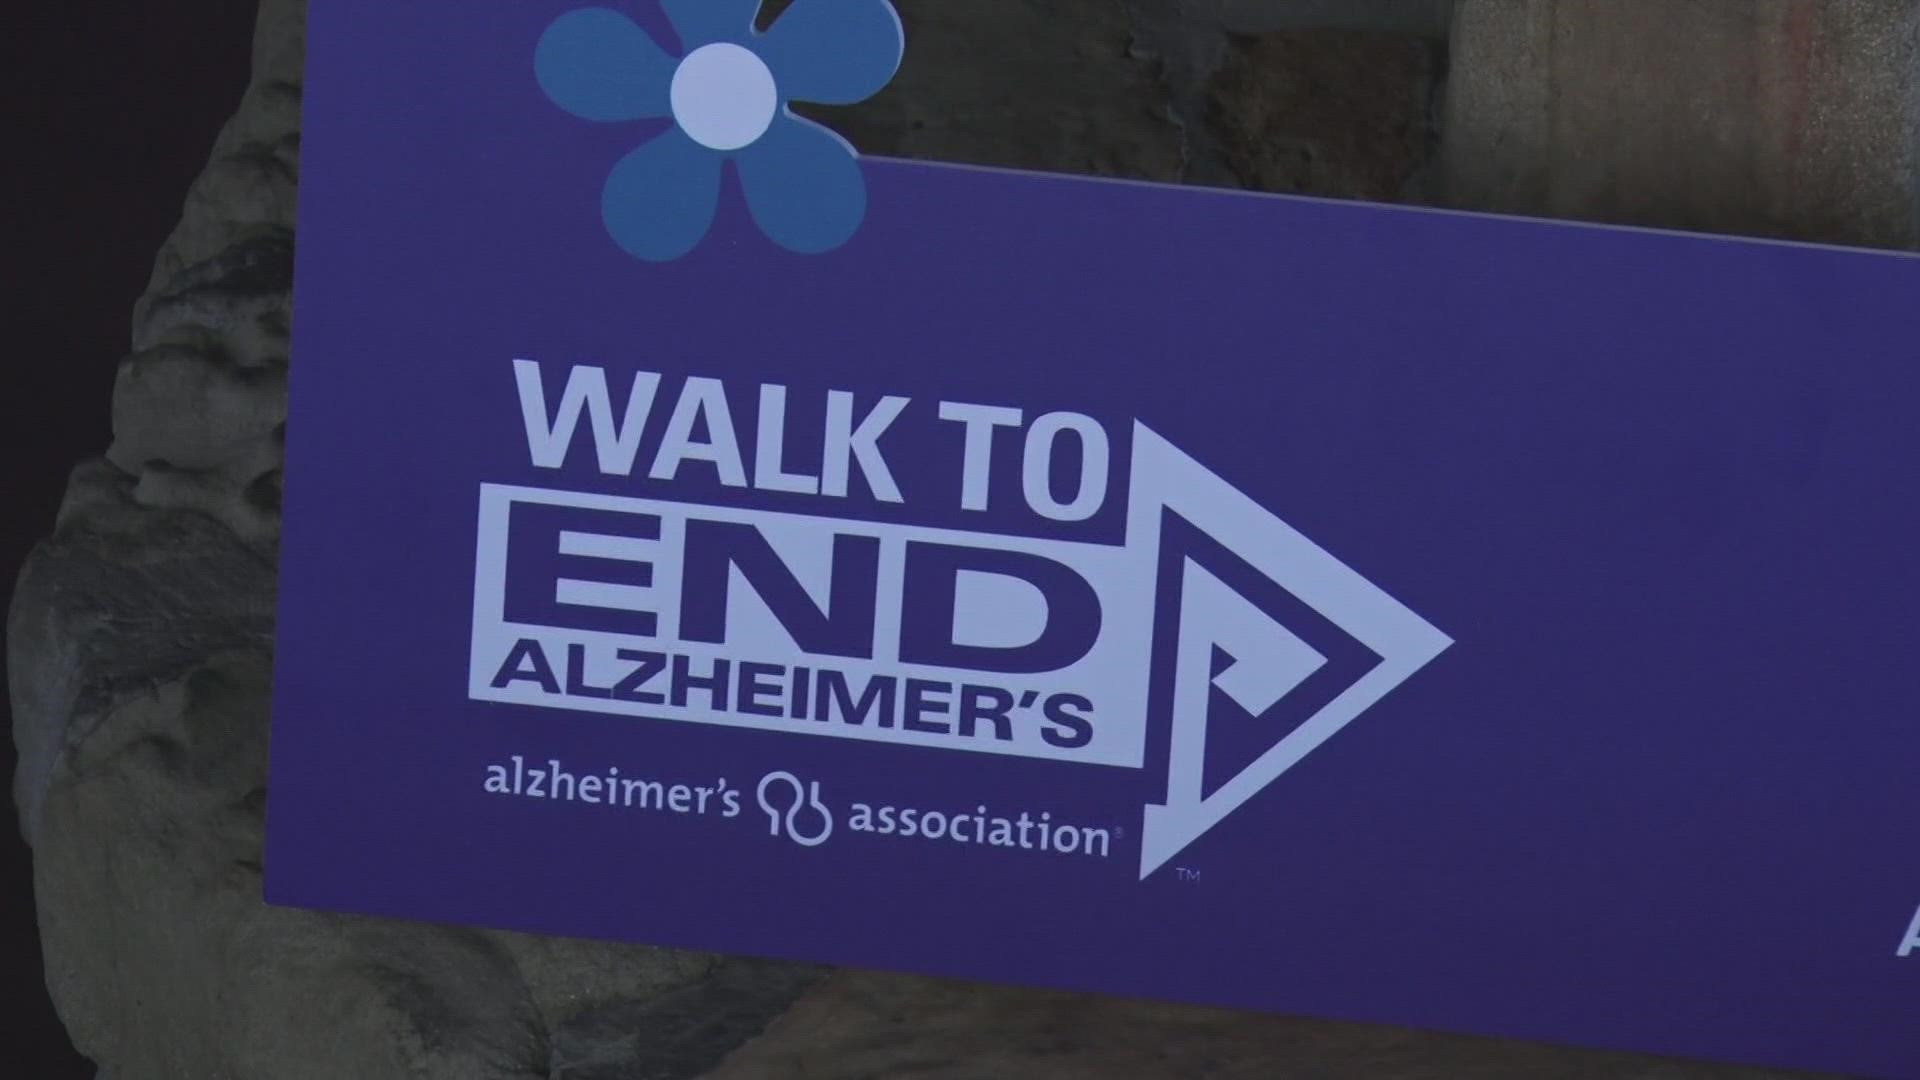 Walk to End Alzheimer's will have a walk to raise money to fight the disease on Oct. 29.